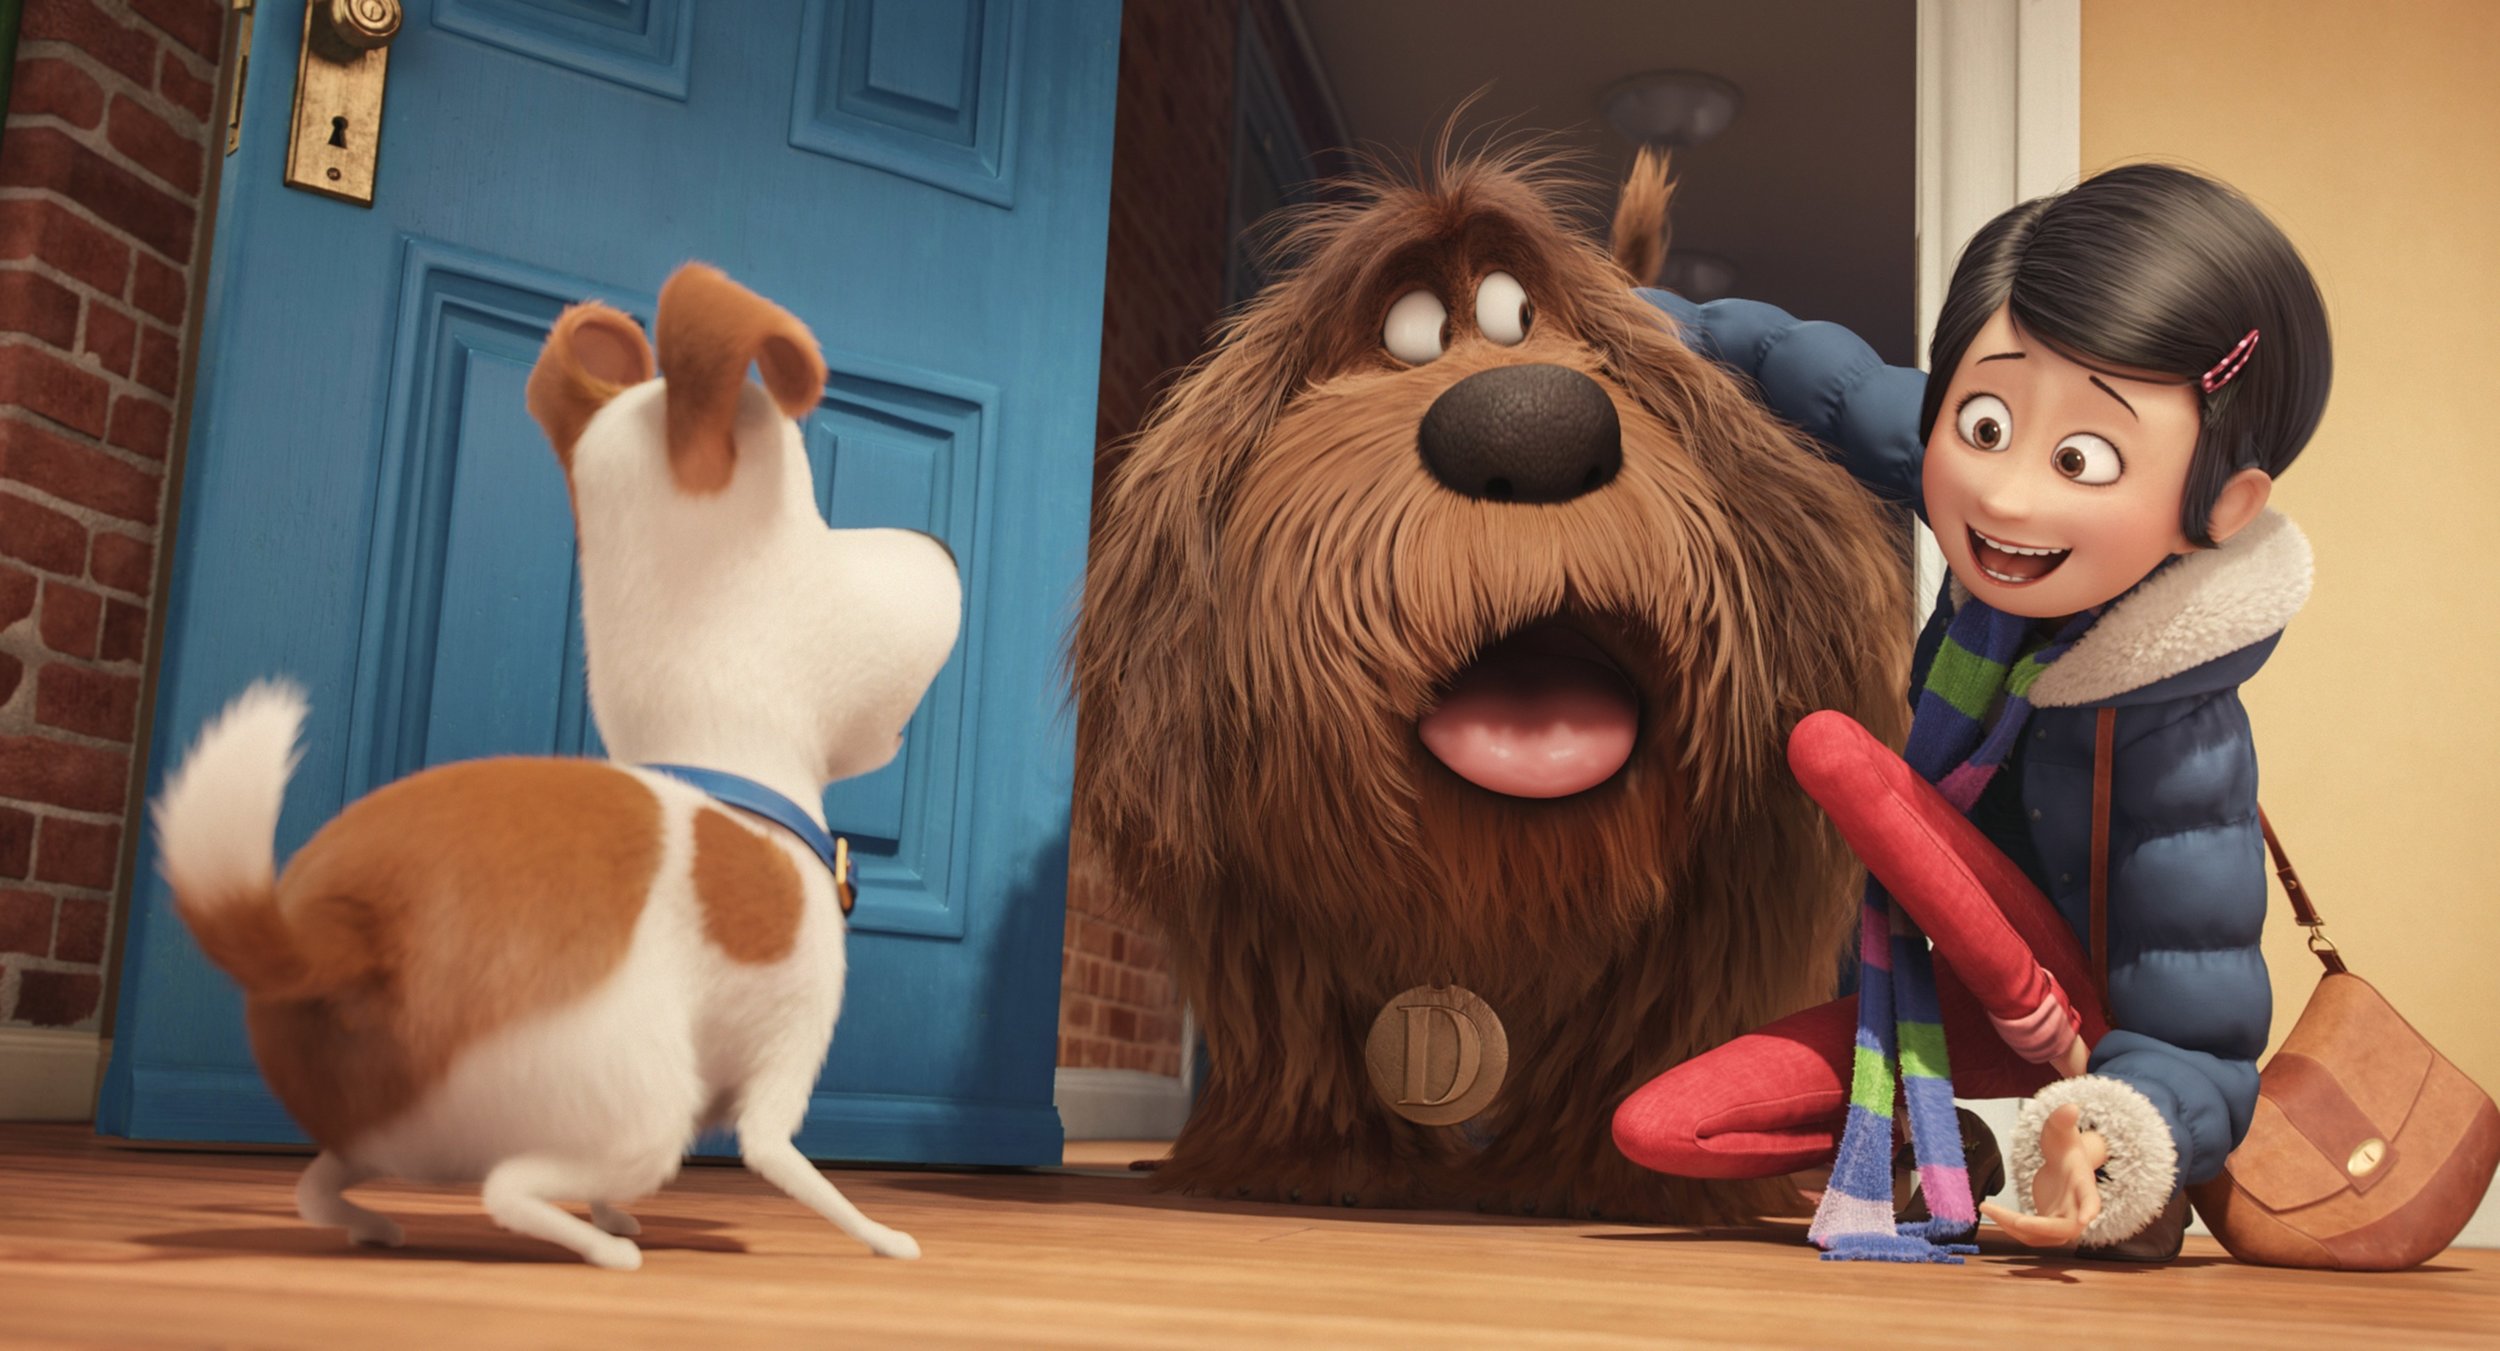 The Secret Life of Pets features the voices of Kevin Hart, Ellie Kemper, Louis C.K., and others.